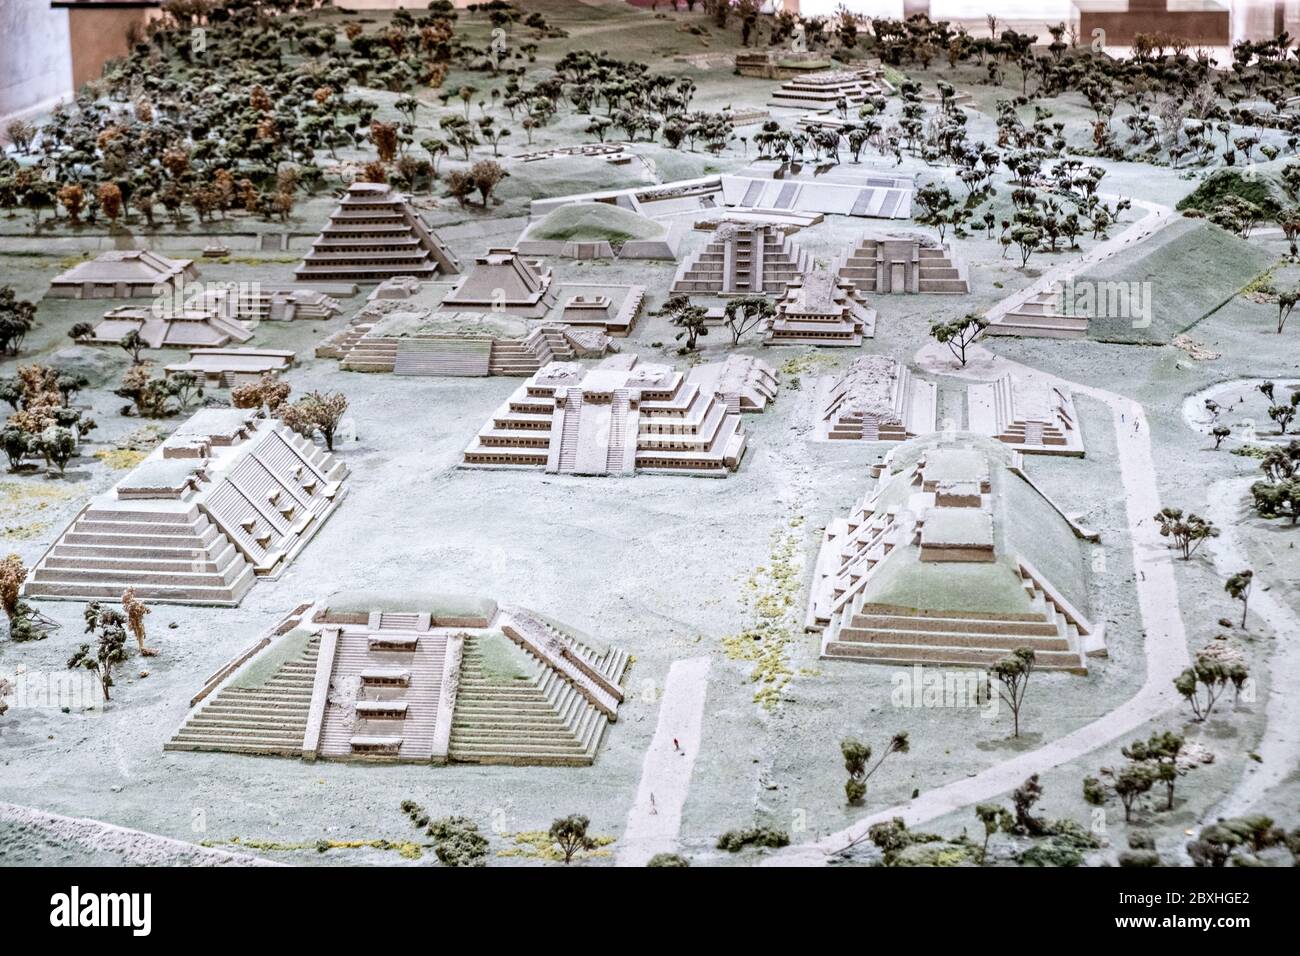 A diorama of the prehispanic Mesoamerican Olmec cultures on display at the Museum of Anthropology in the historic center of Xalapa, Veracruz, Mexico. Stock Photo